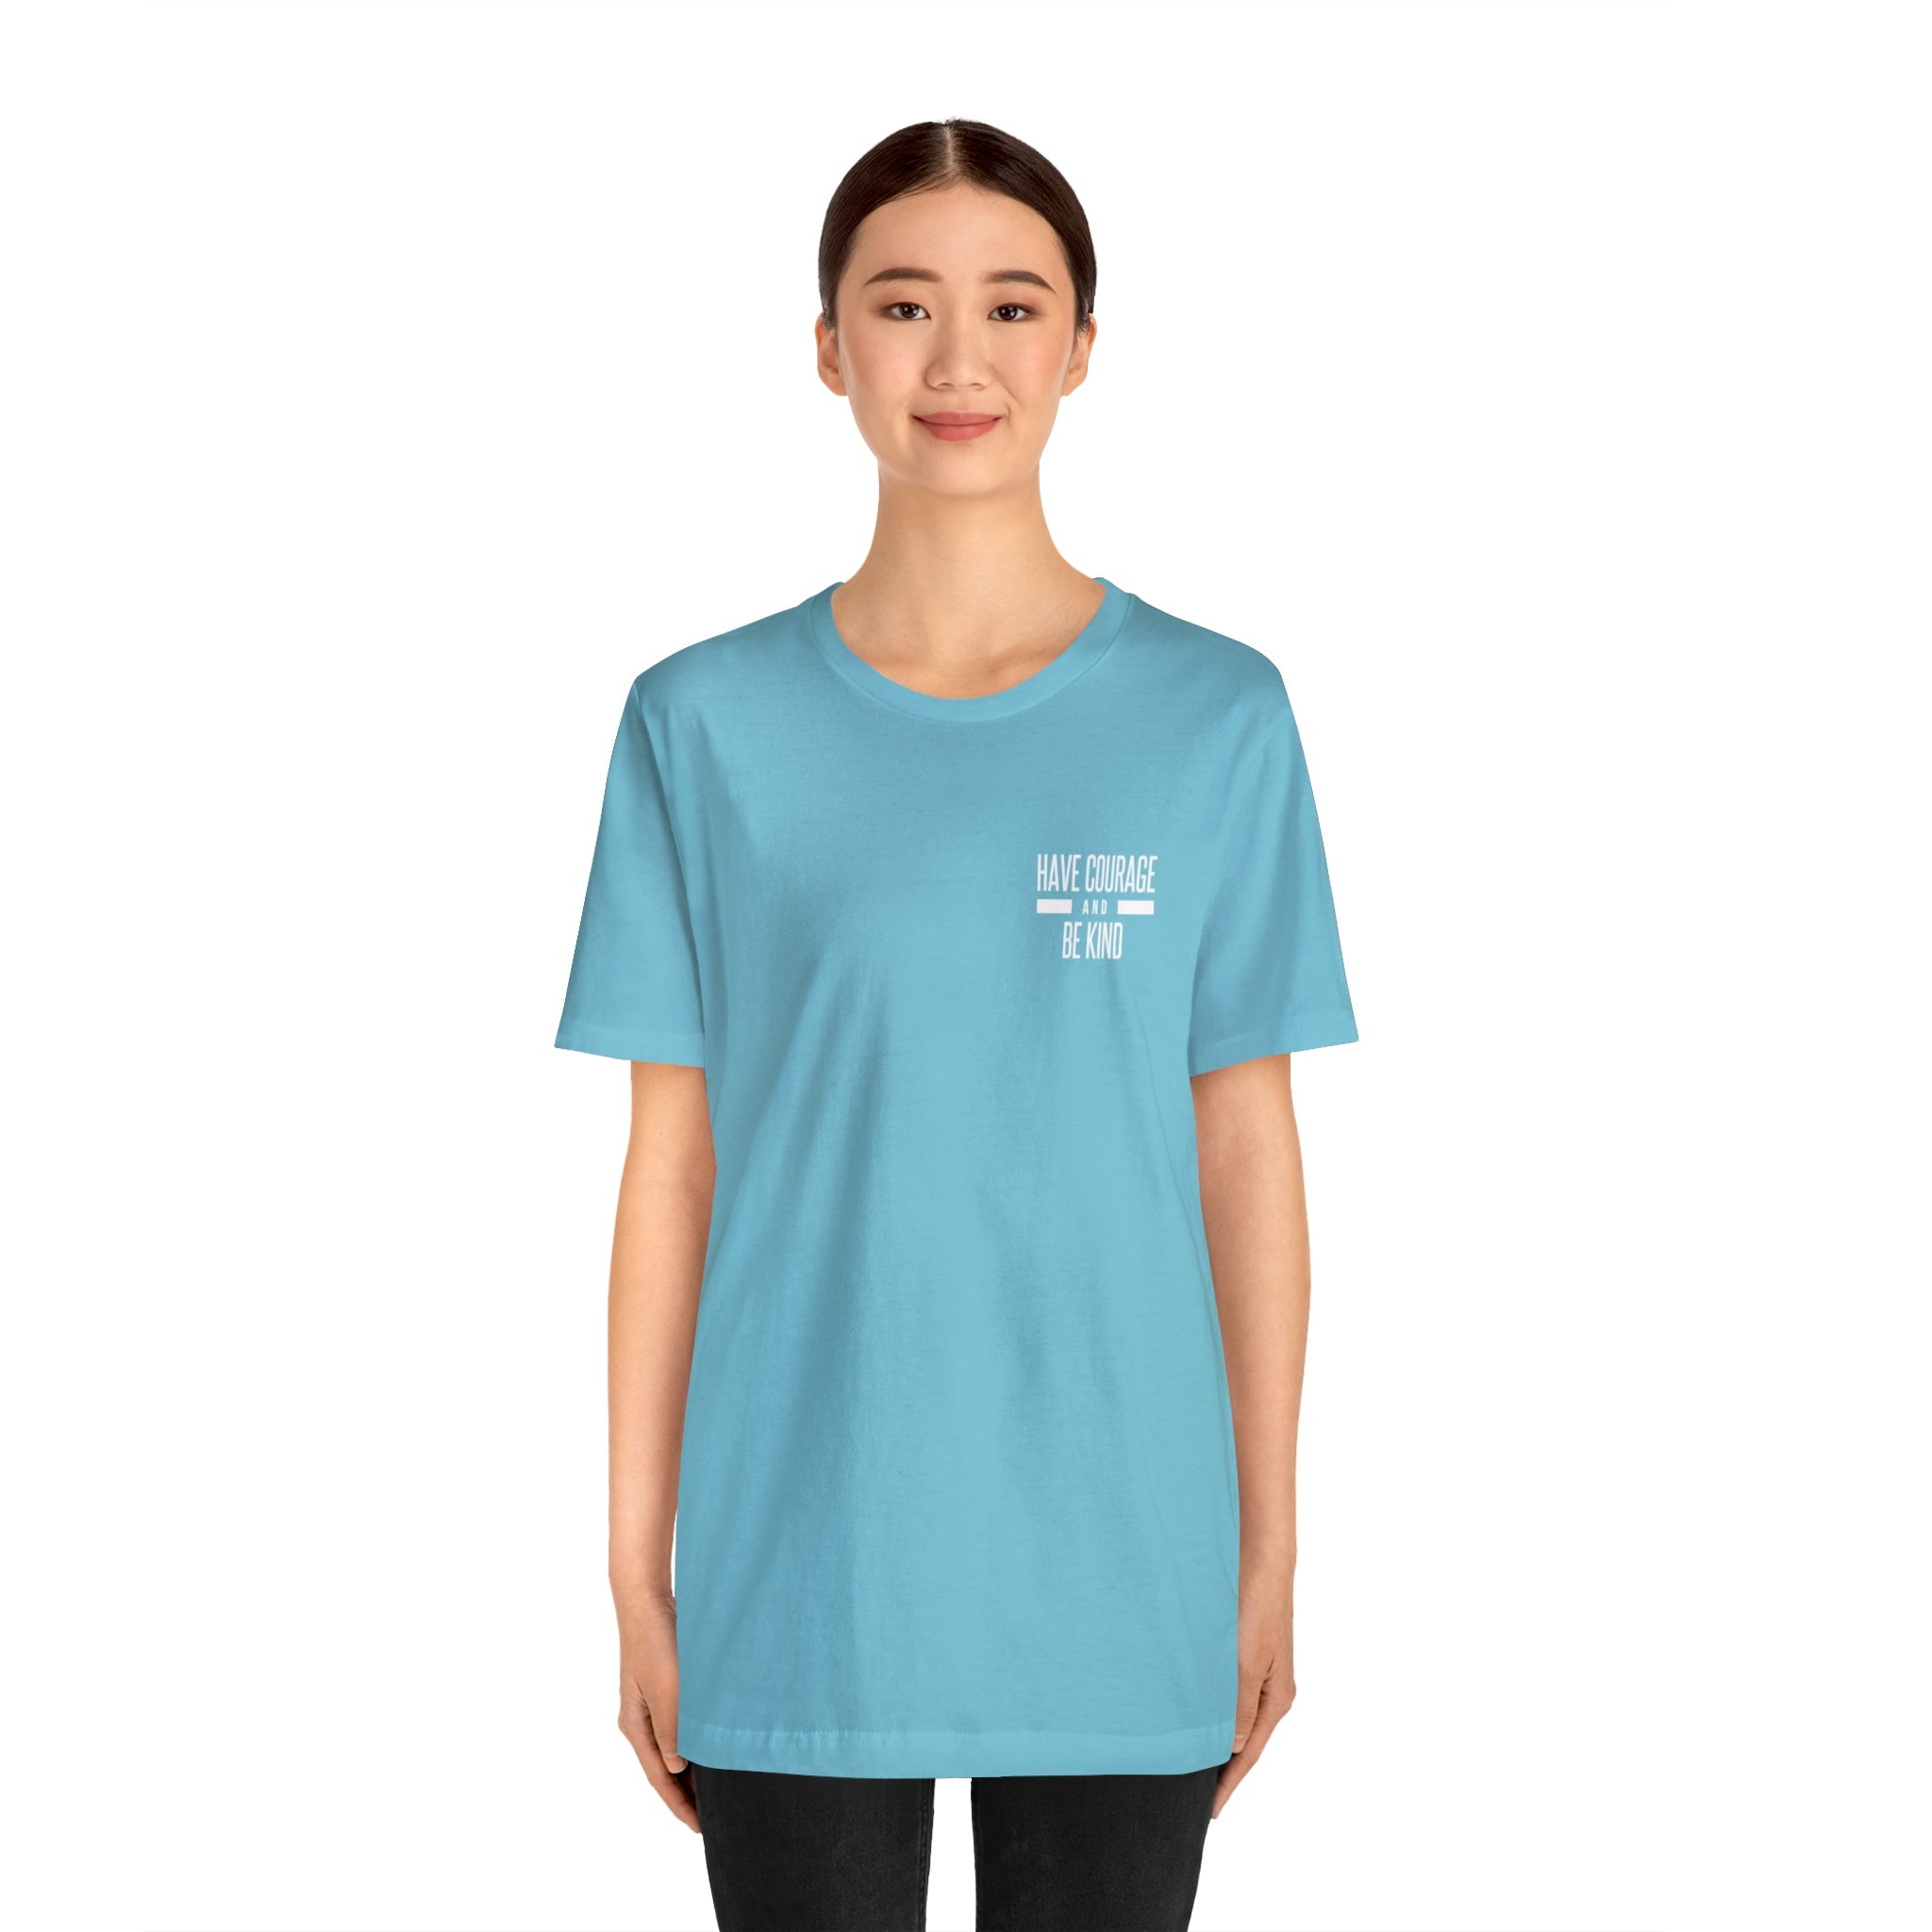 Kindness Is The Language Unisex Jersey Short Sleeve Tee - The Kindness Cause